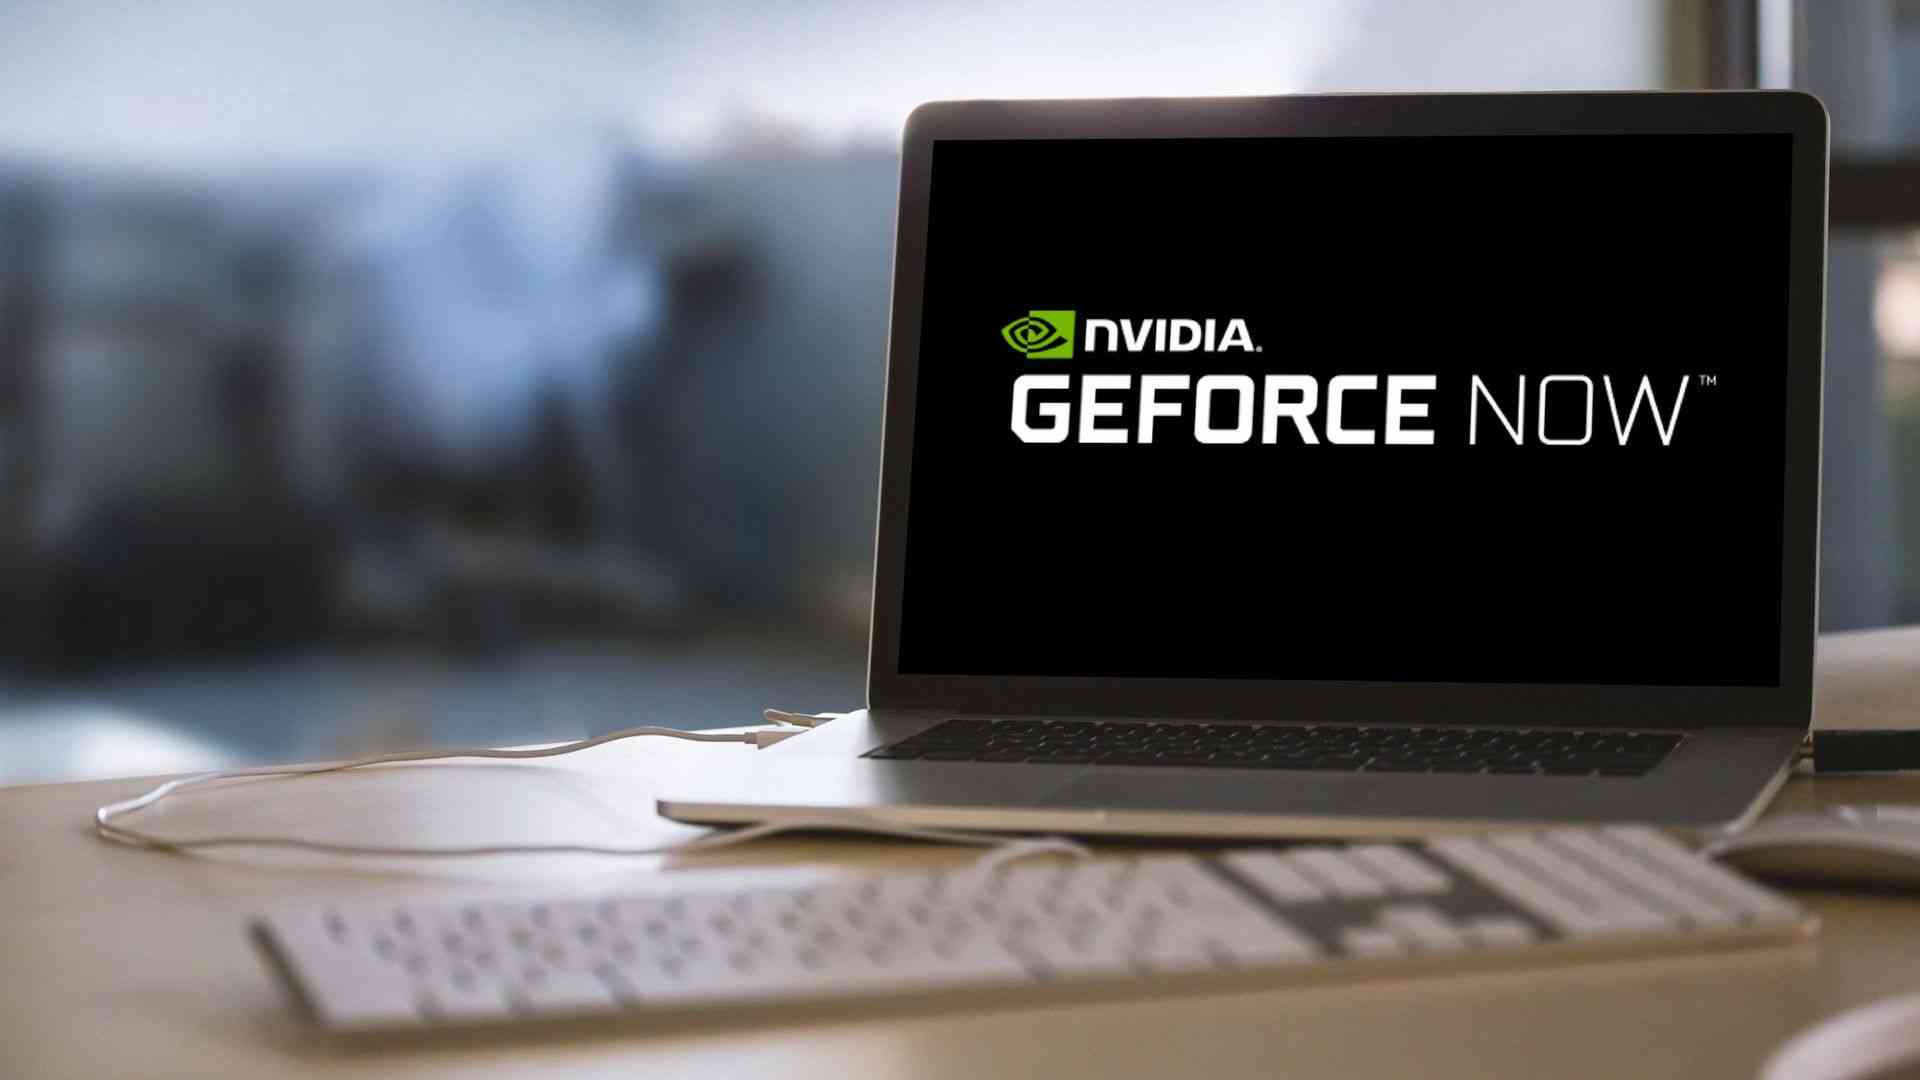 geforce now expands its content day by day 4521 big 1